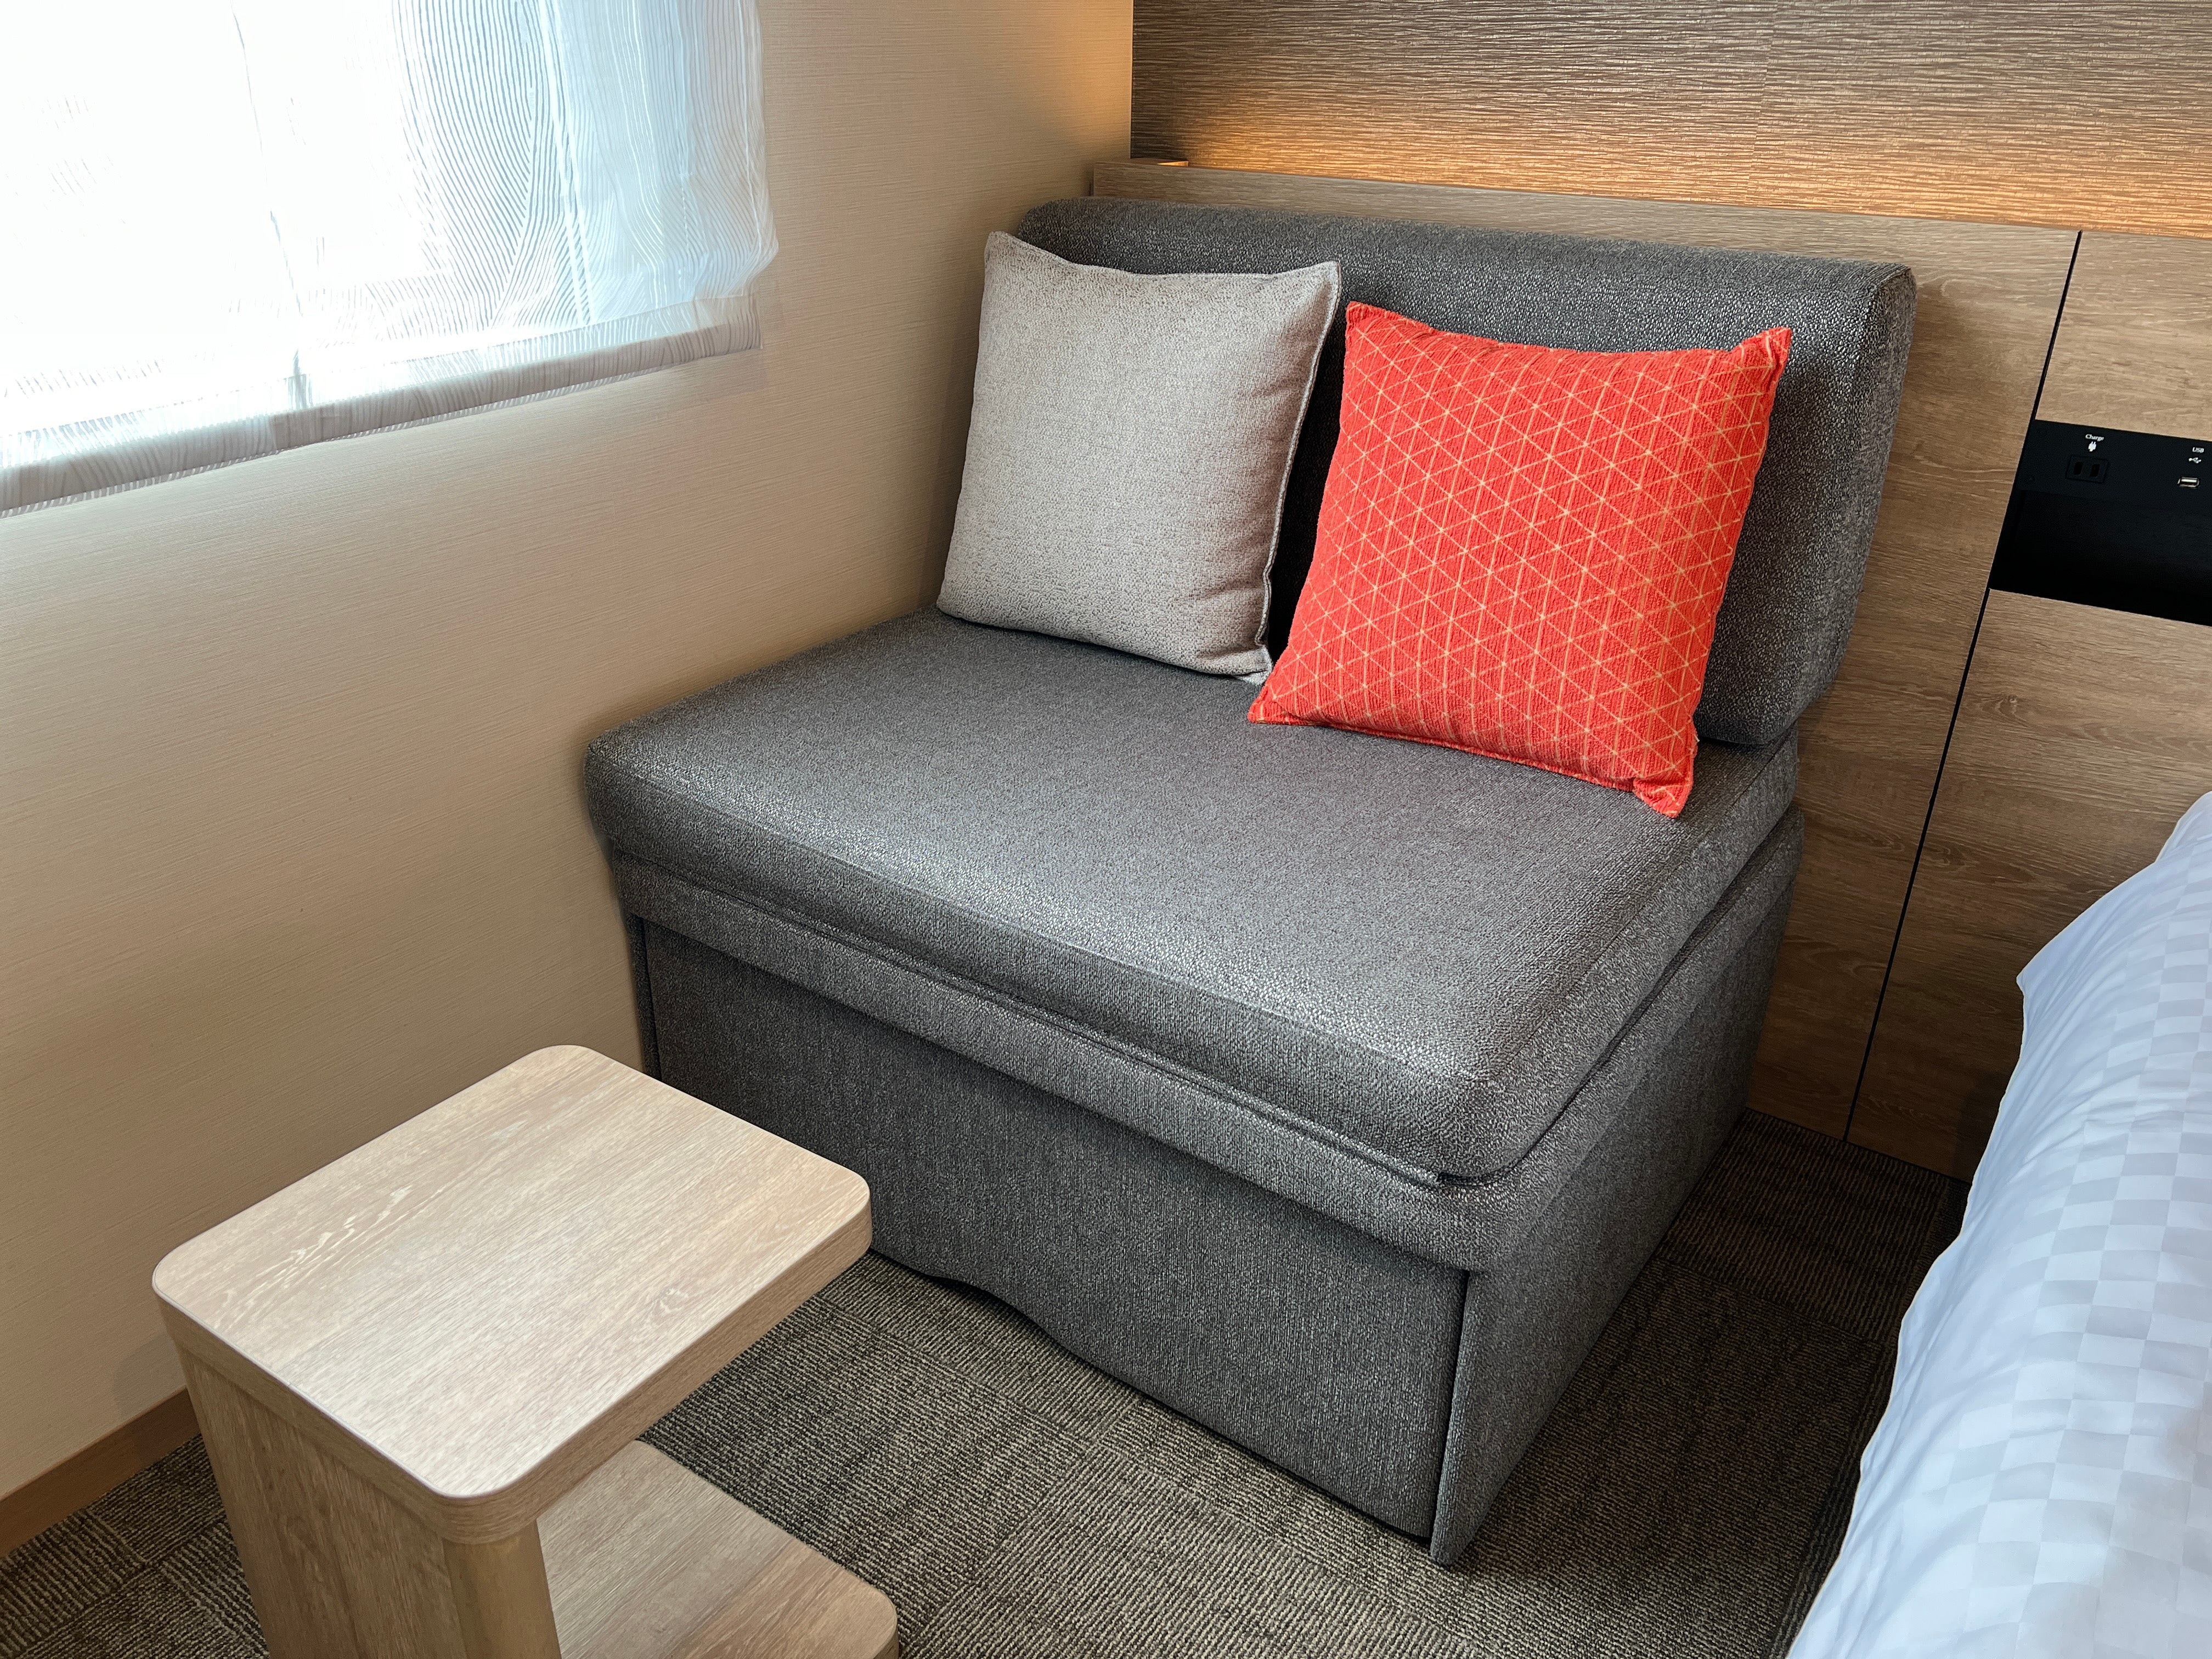 The deluxe twin room also has a sofa! * Cannot be used when the sofa bed is deployed.